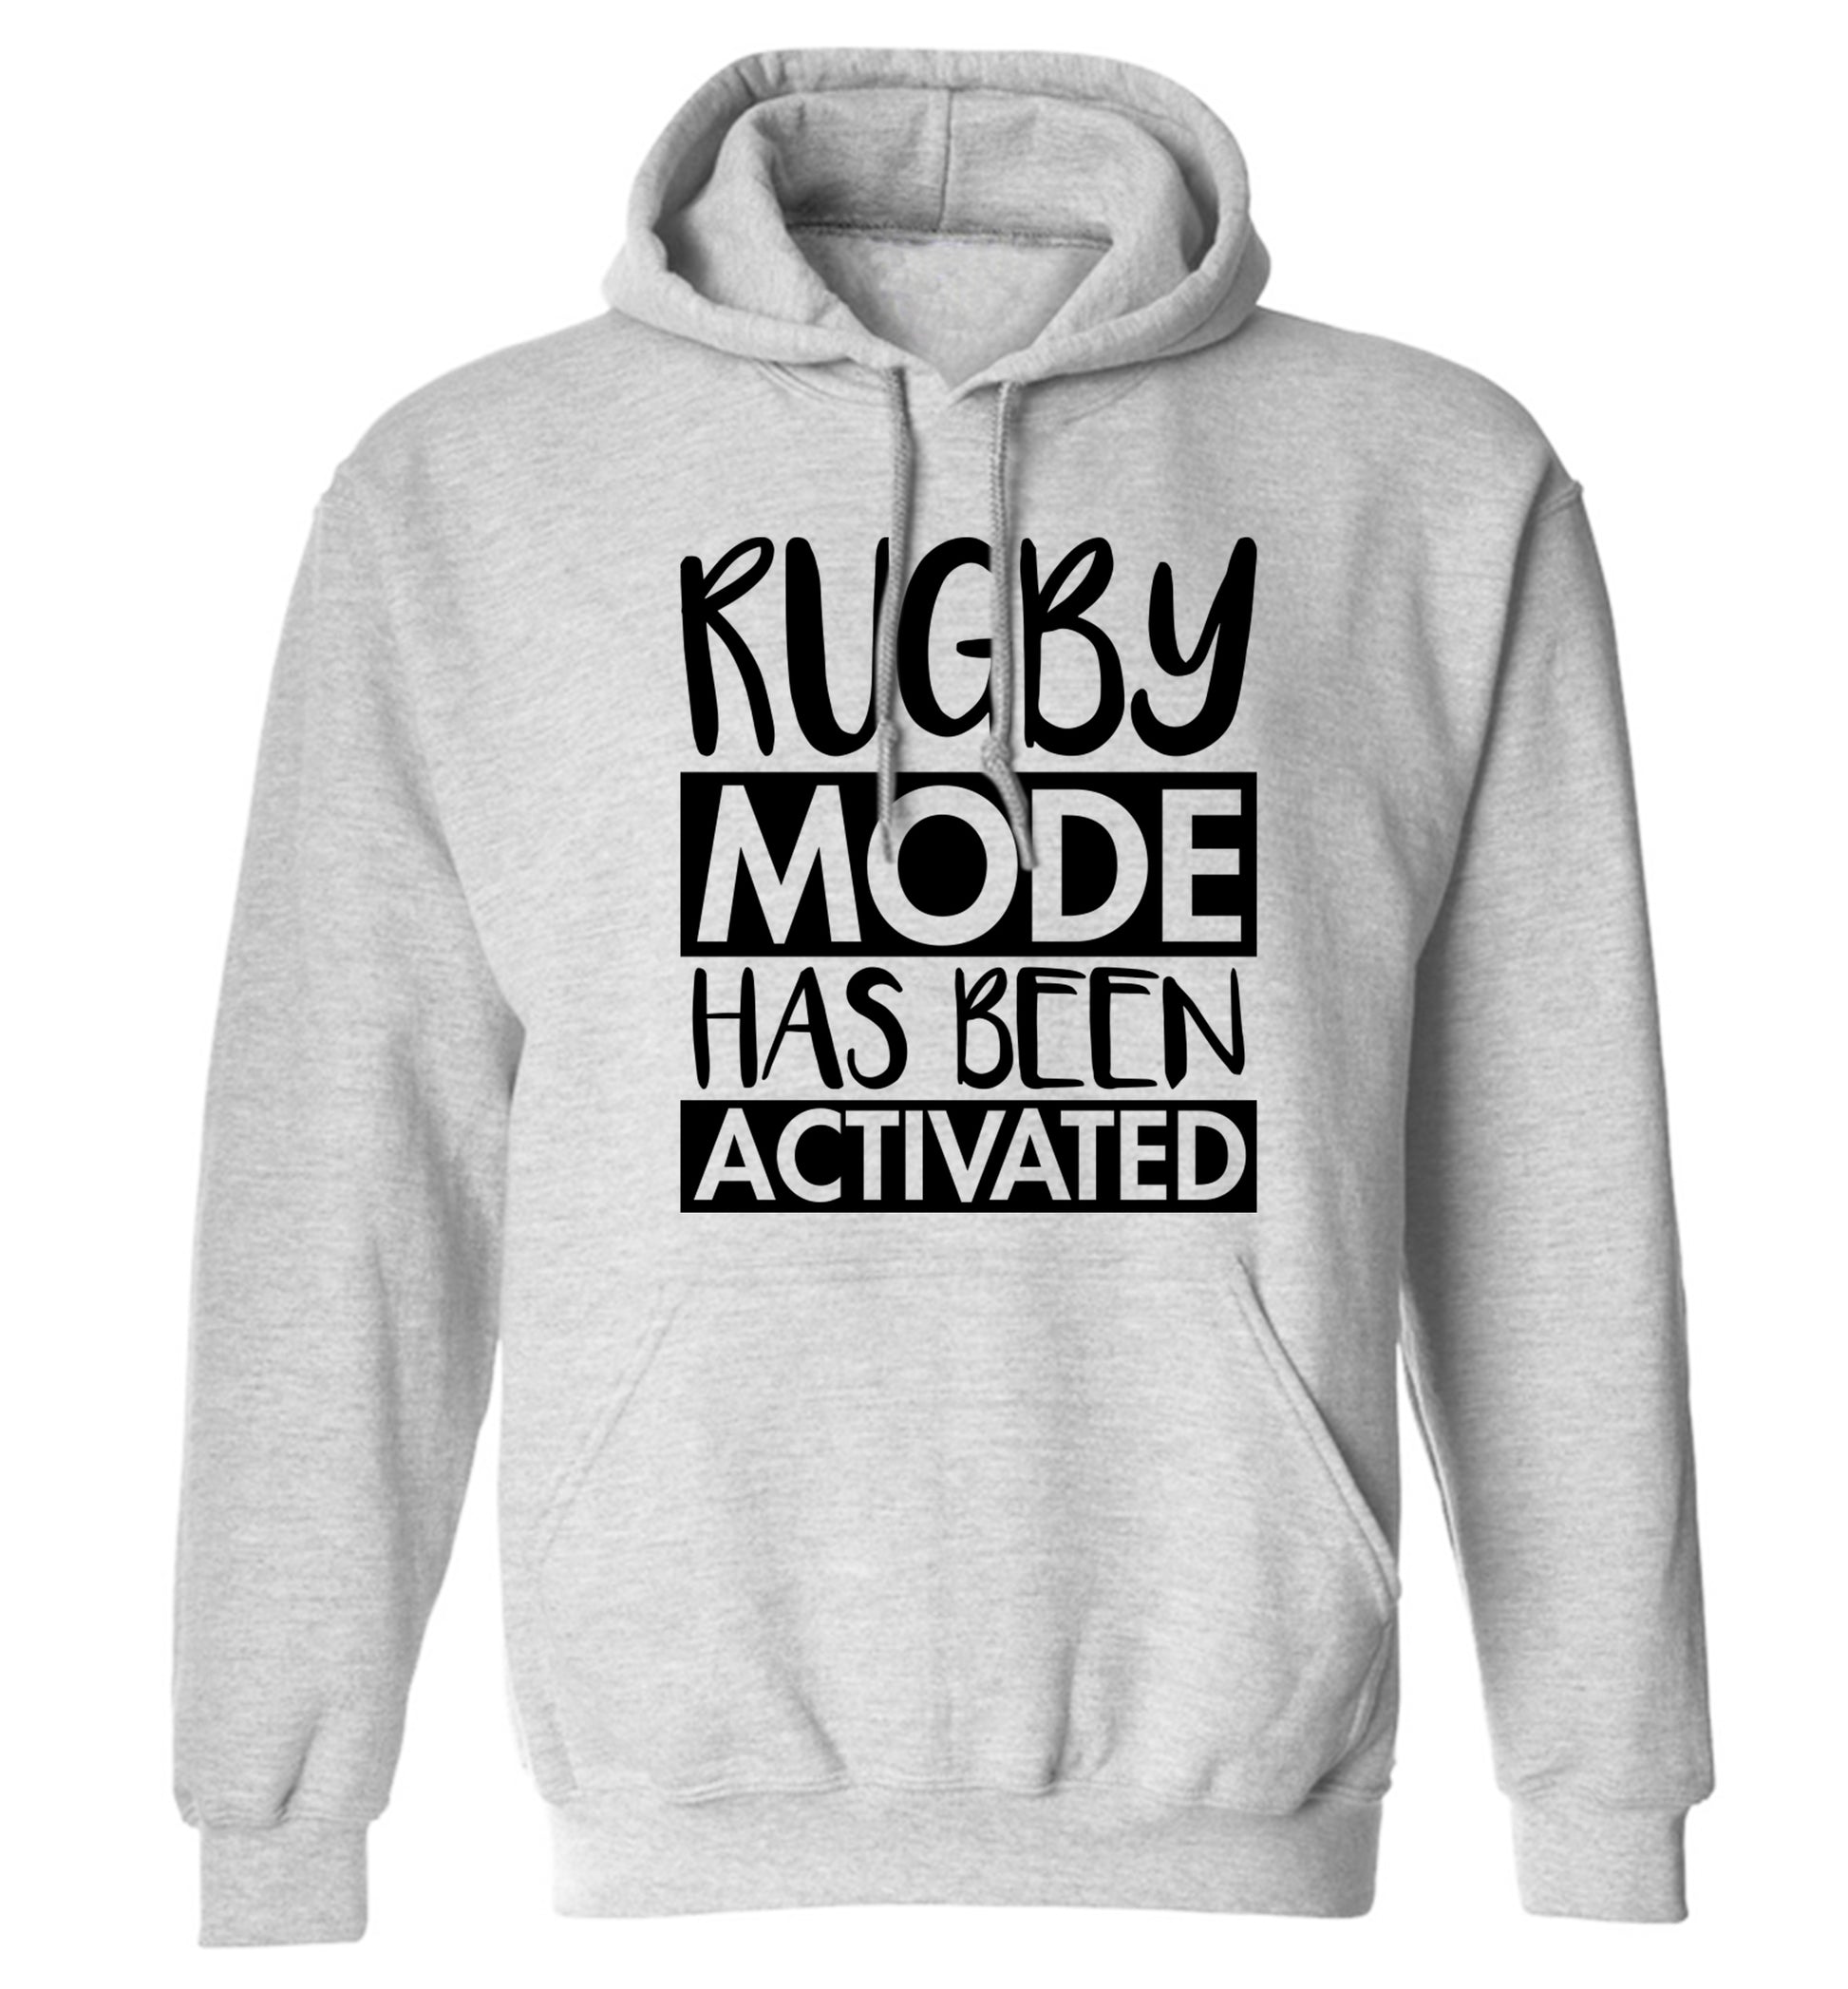 Rugby mode activated adults unisex grey hoodie 2XL